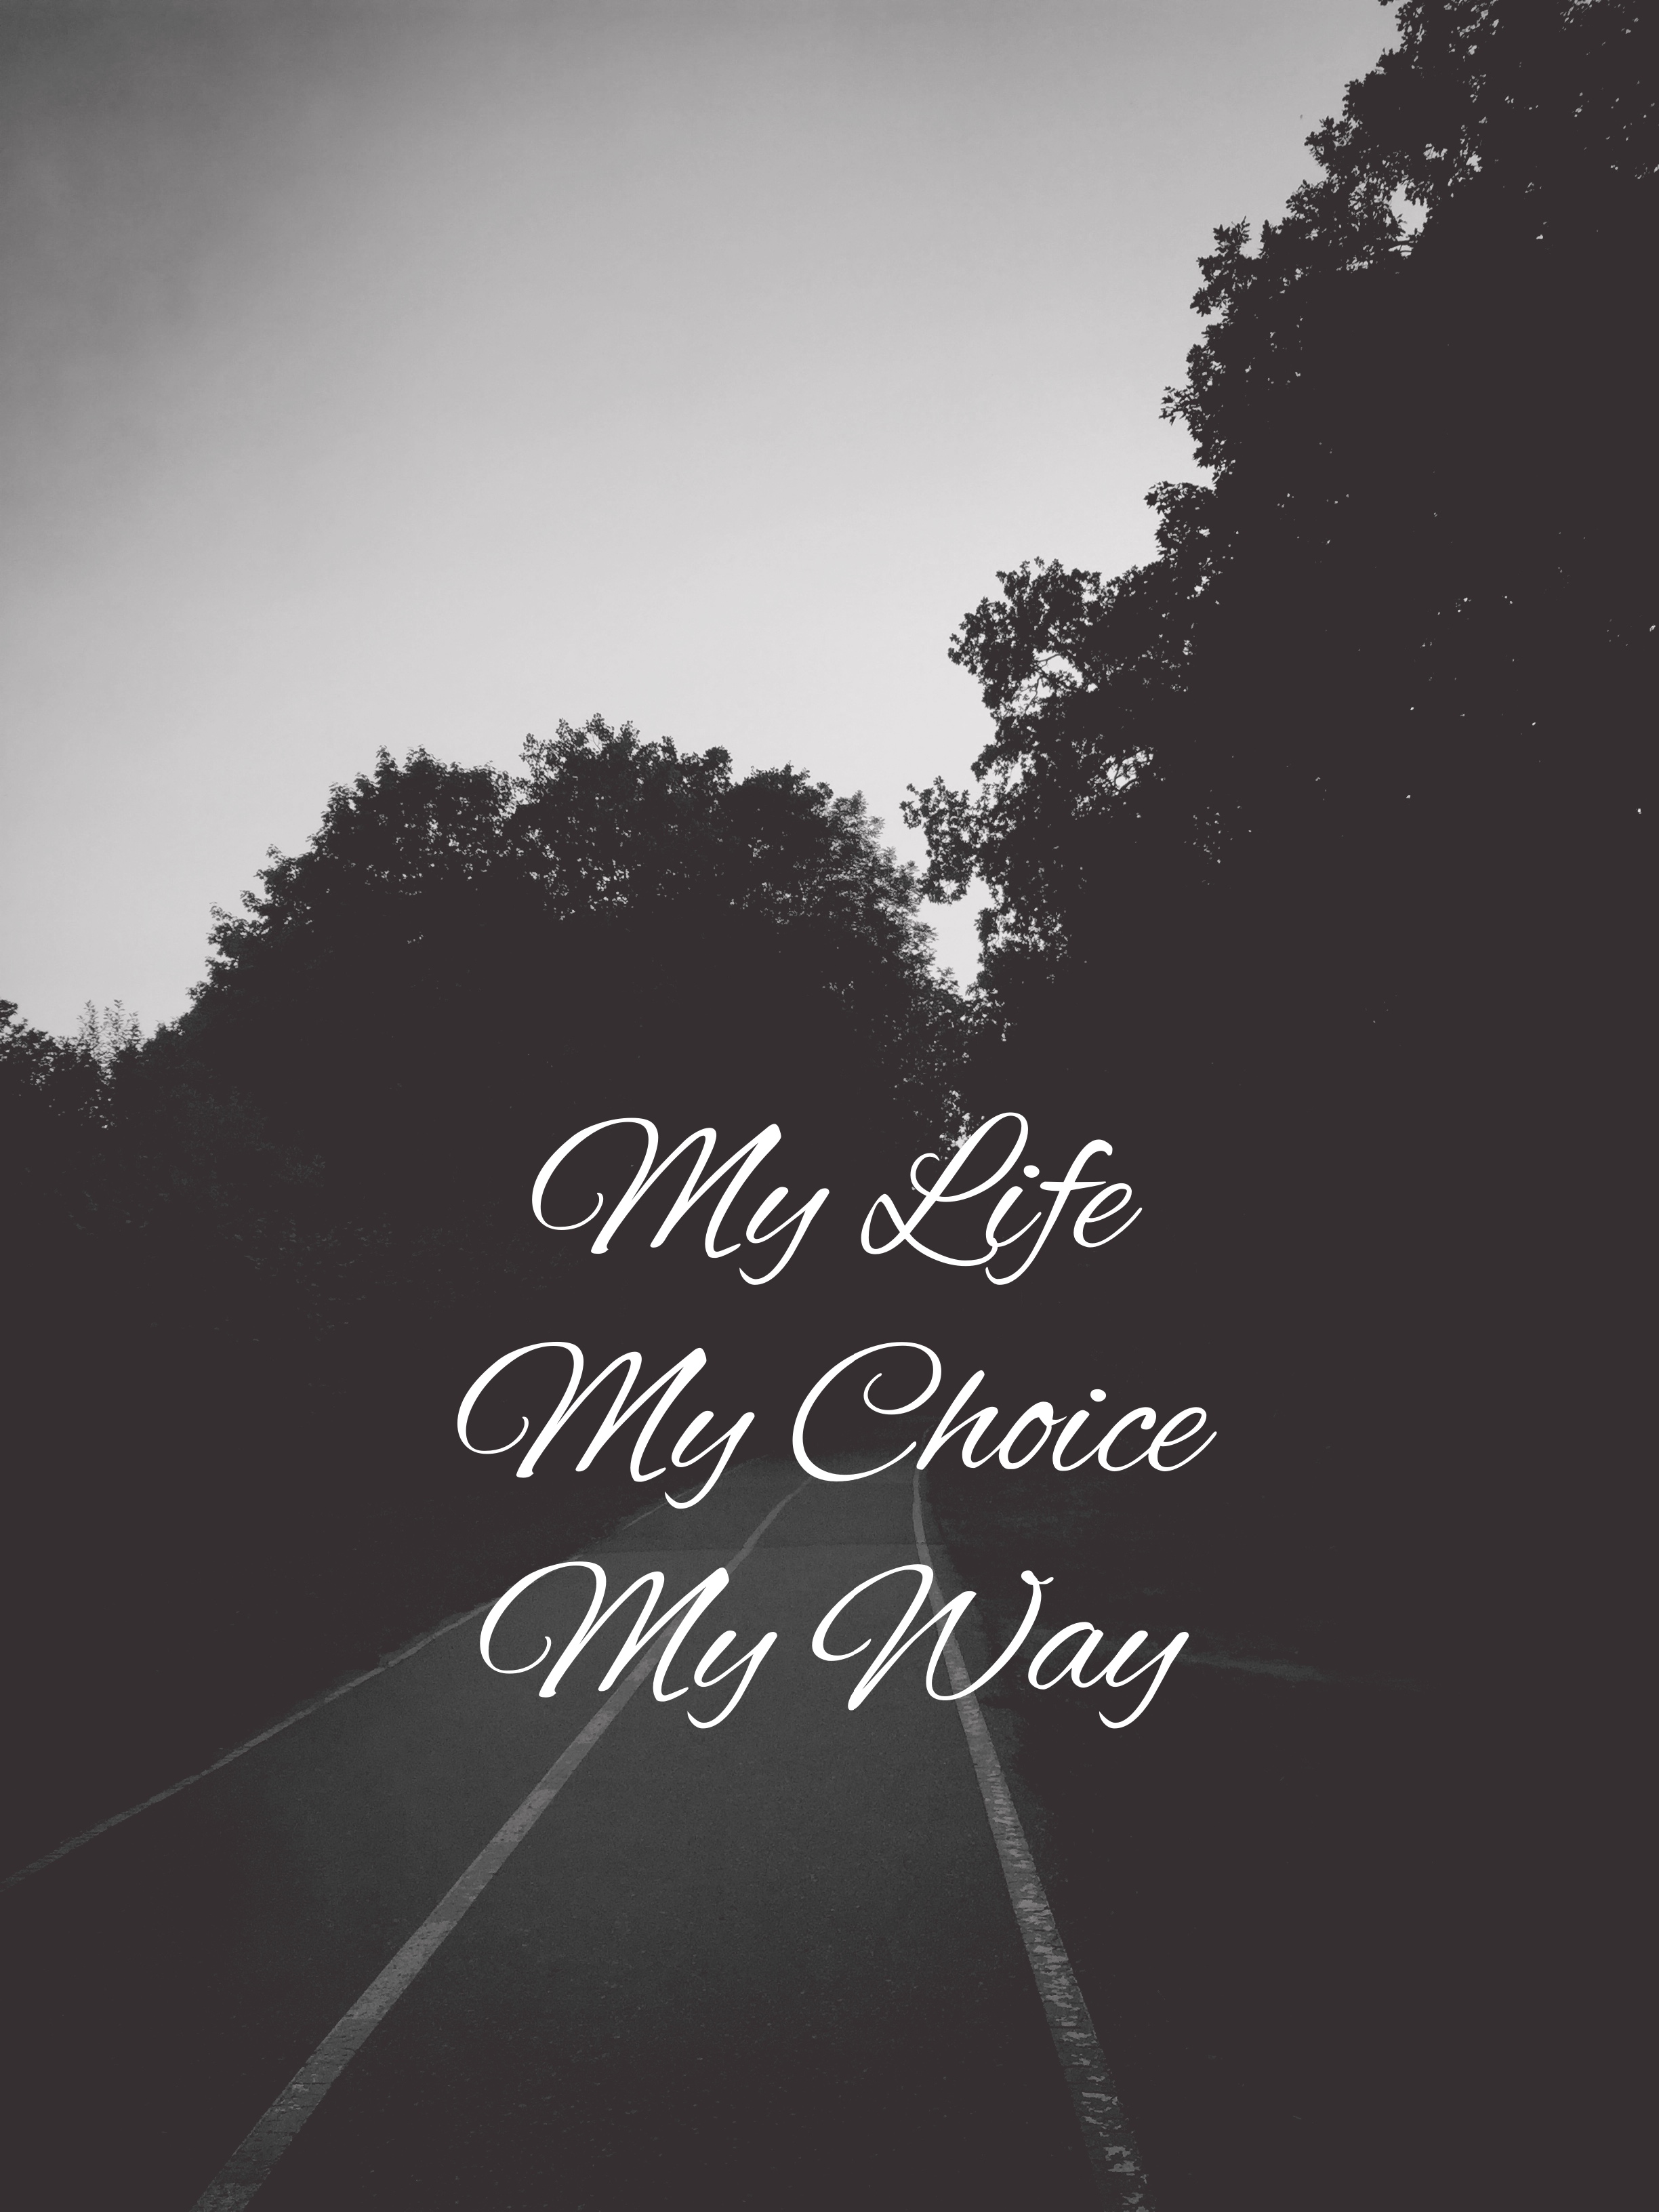 words, bw, quotation, text, quote, chb, inscription, road, path, way